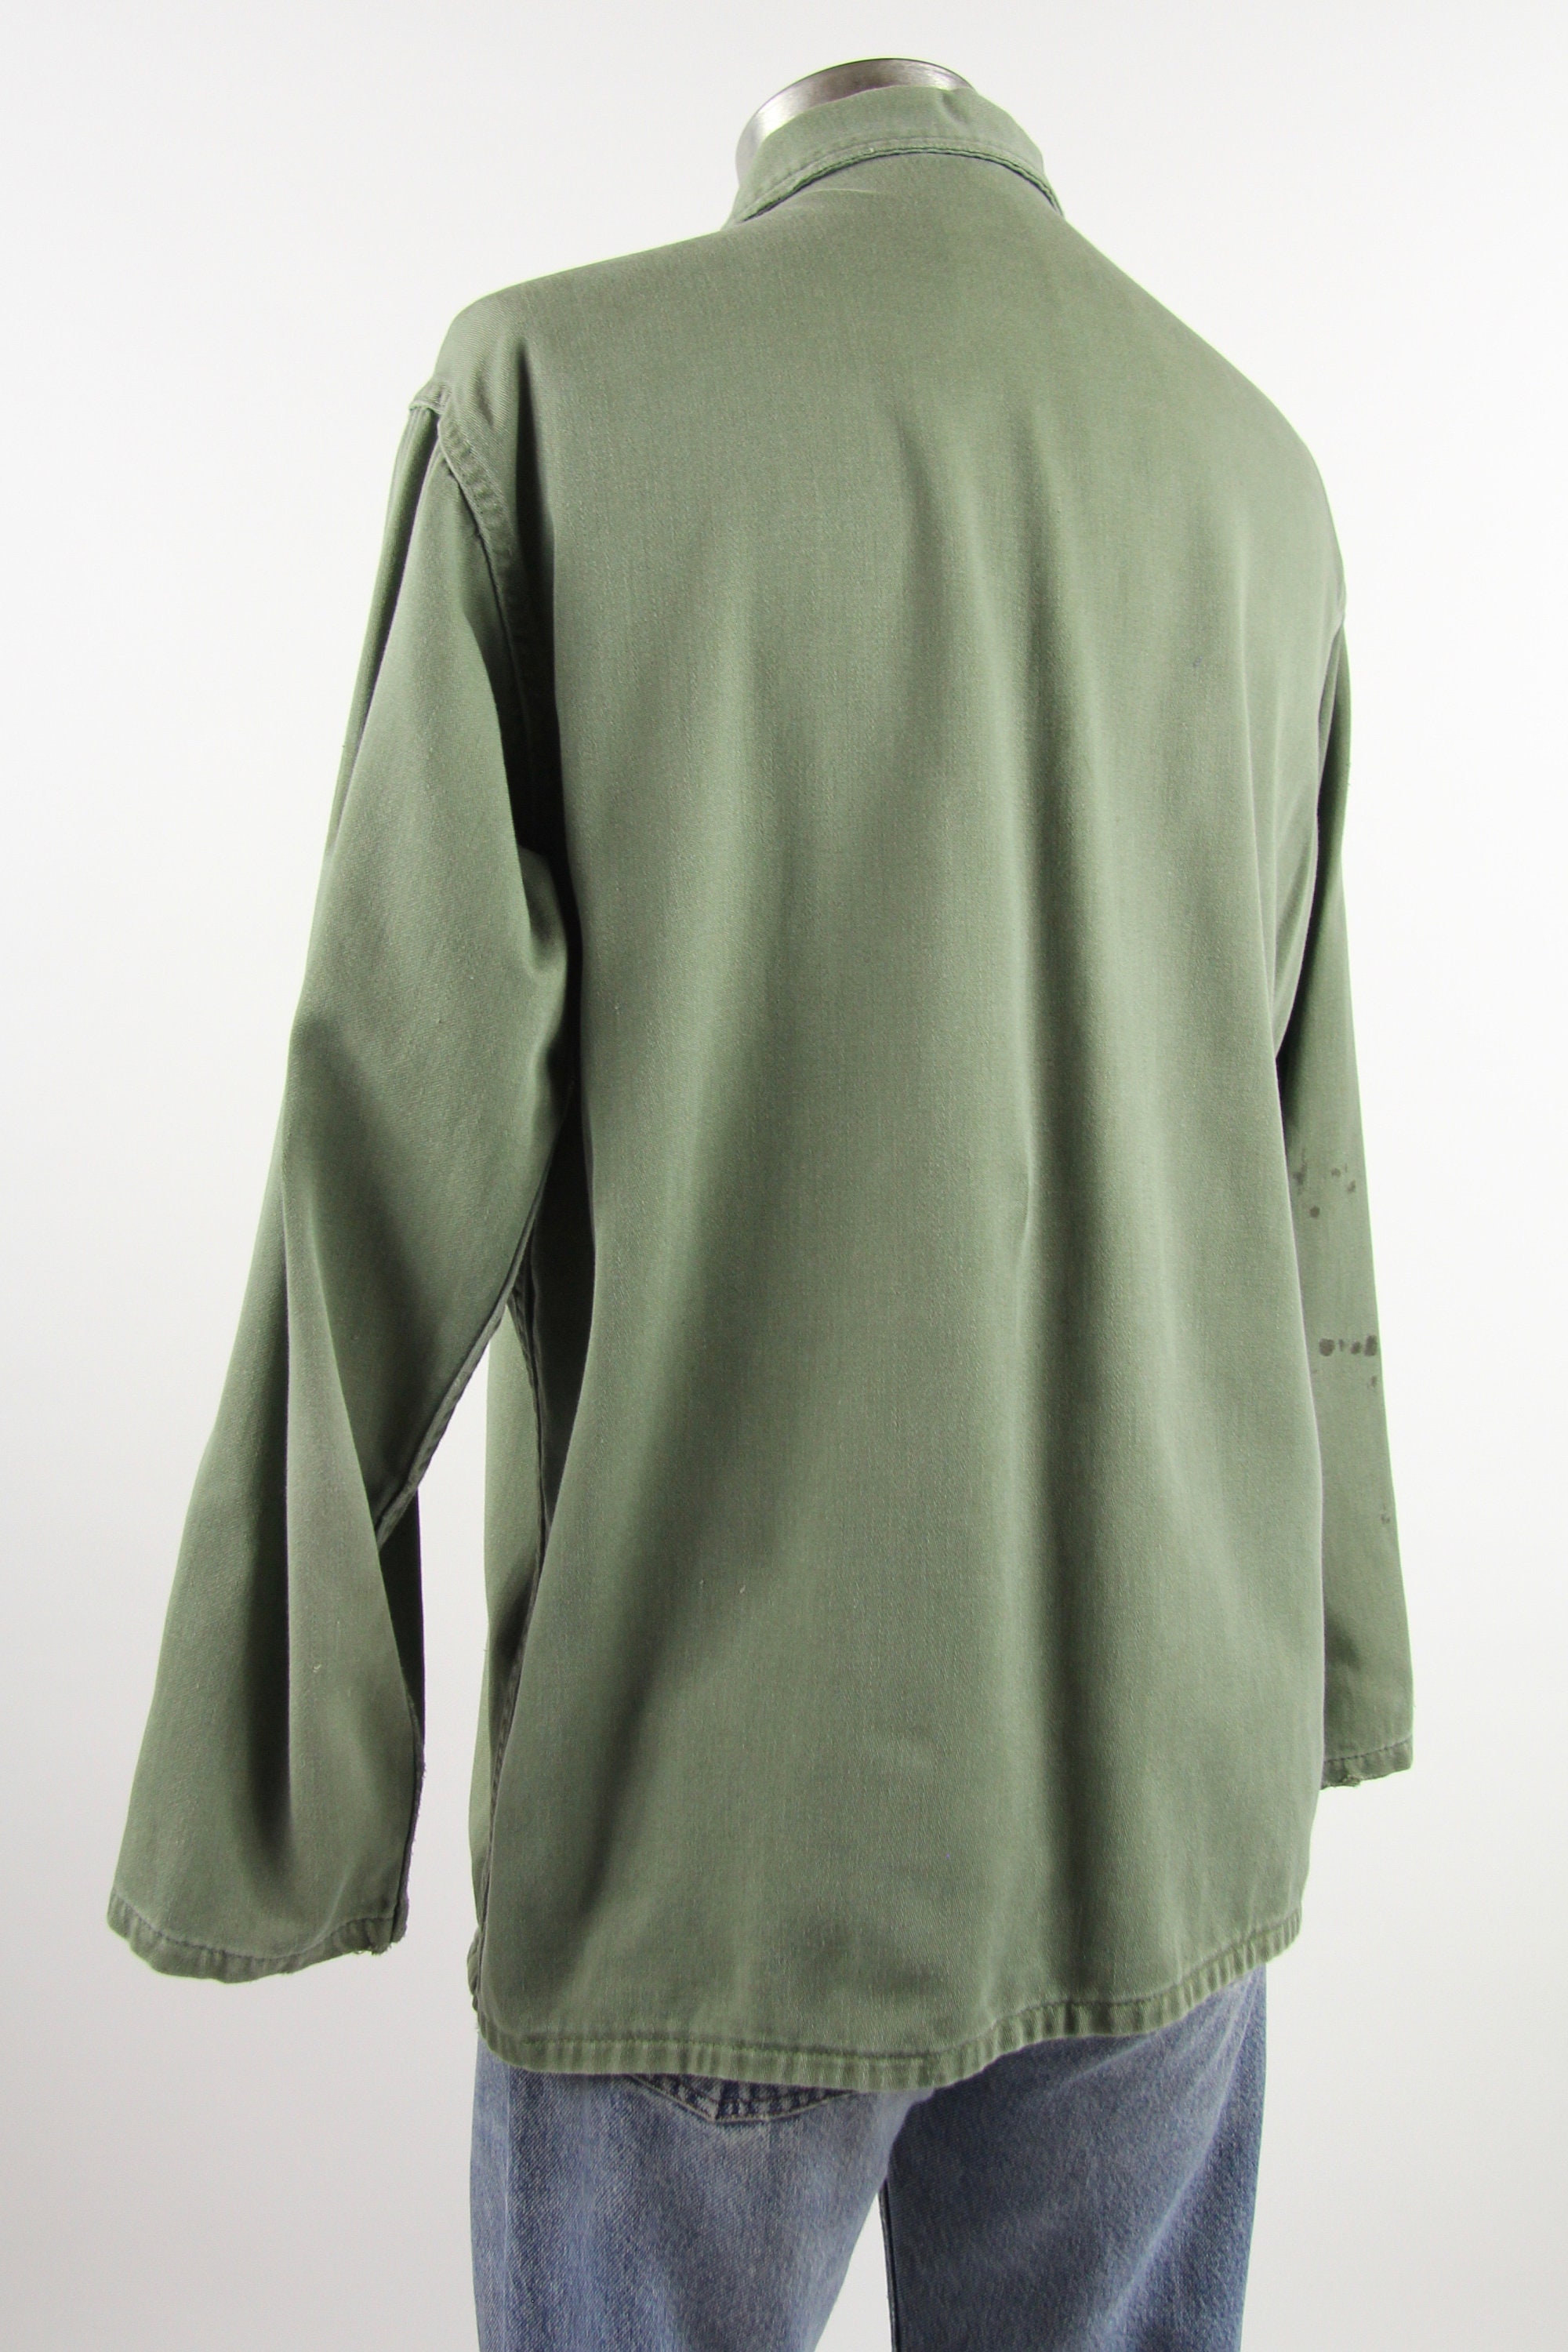 Military Green Shirt Men's Olive Green BVD Army Long Sleeve Shirt Size ...